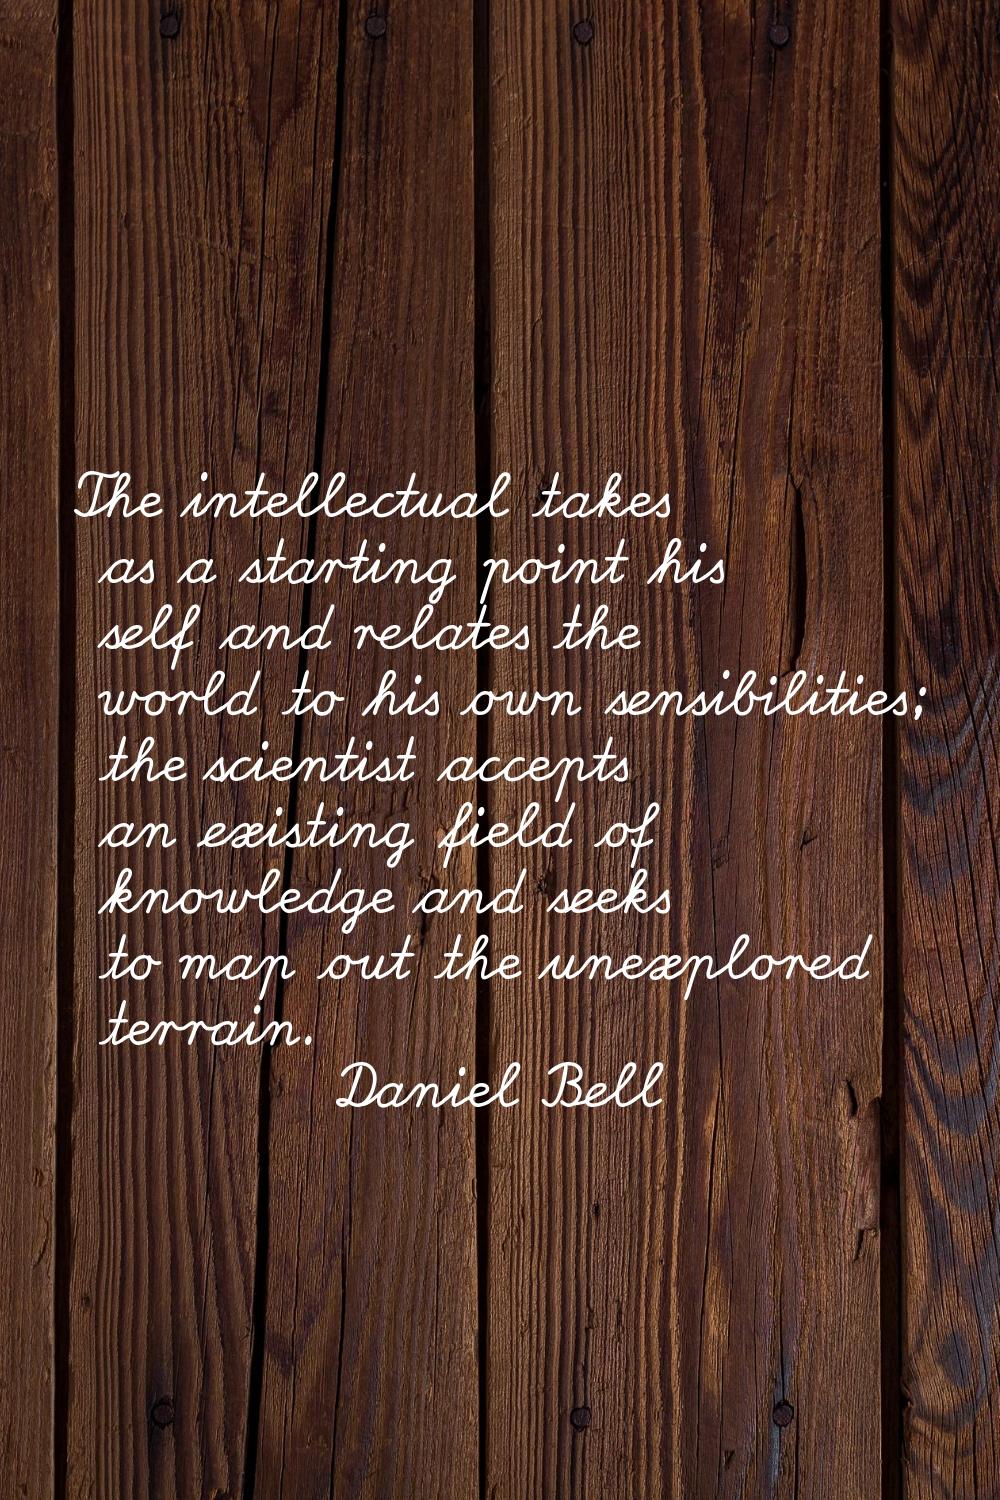 The intellectual takes as a starting point his self and relates the world to his own sensibilities;